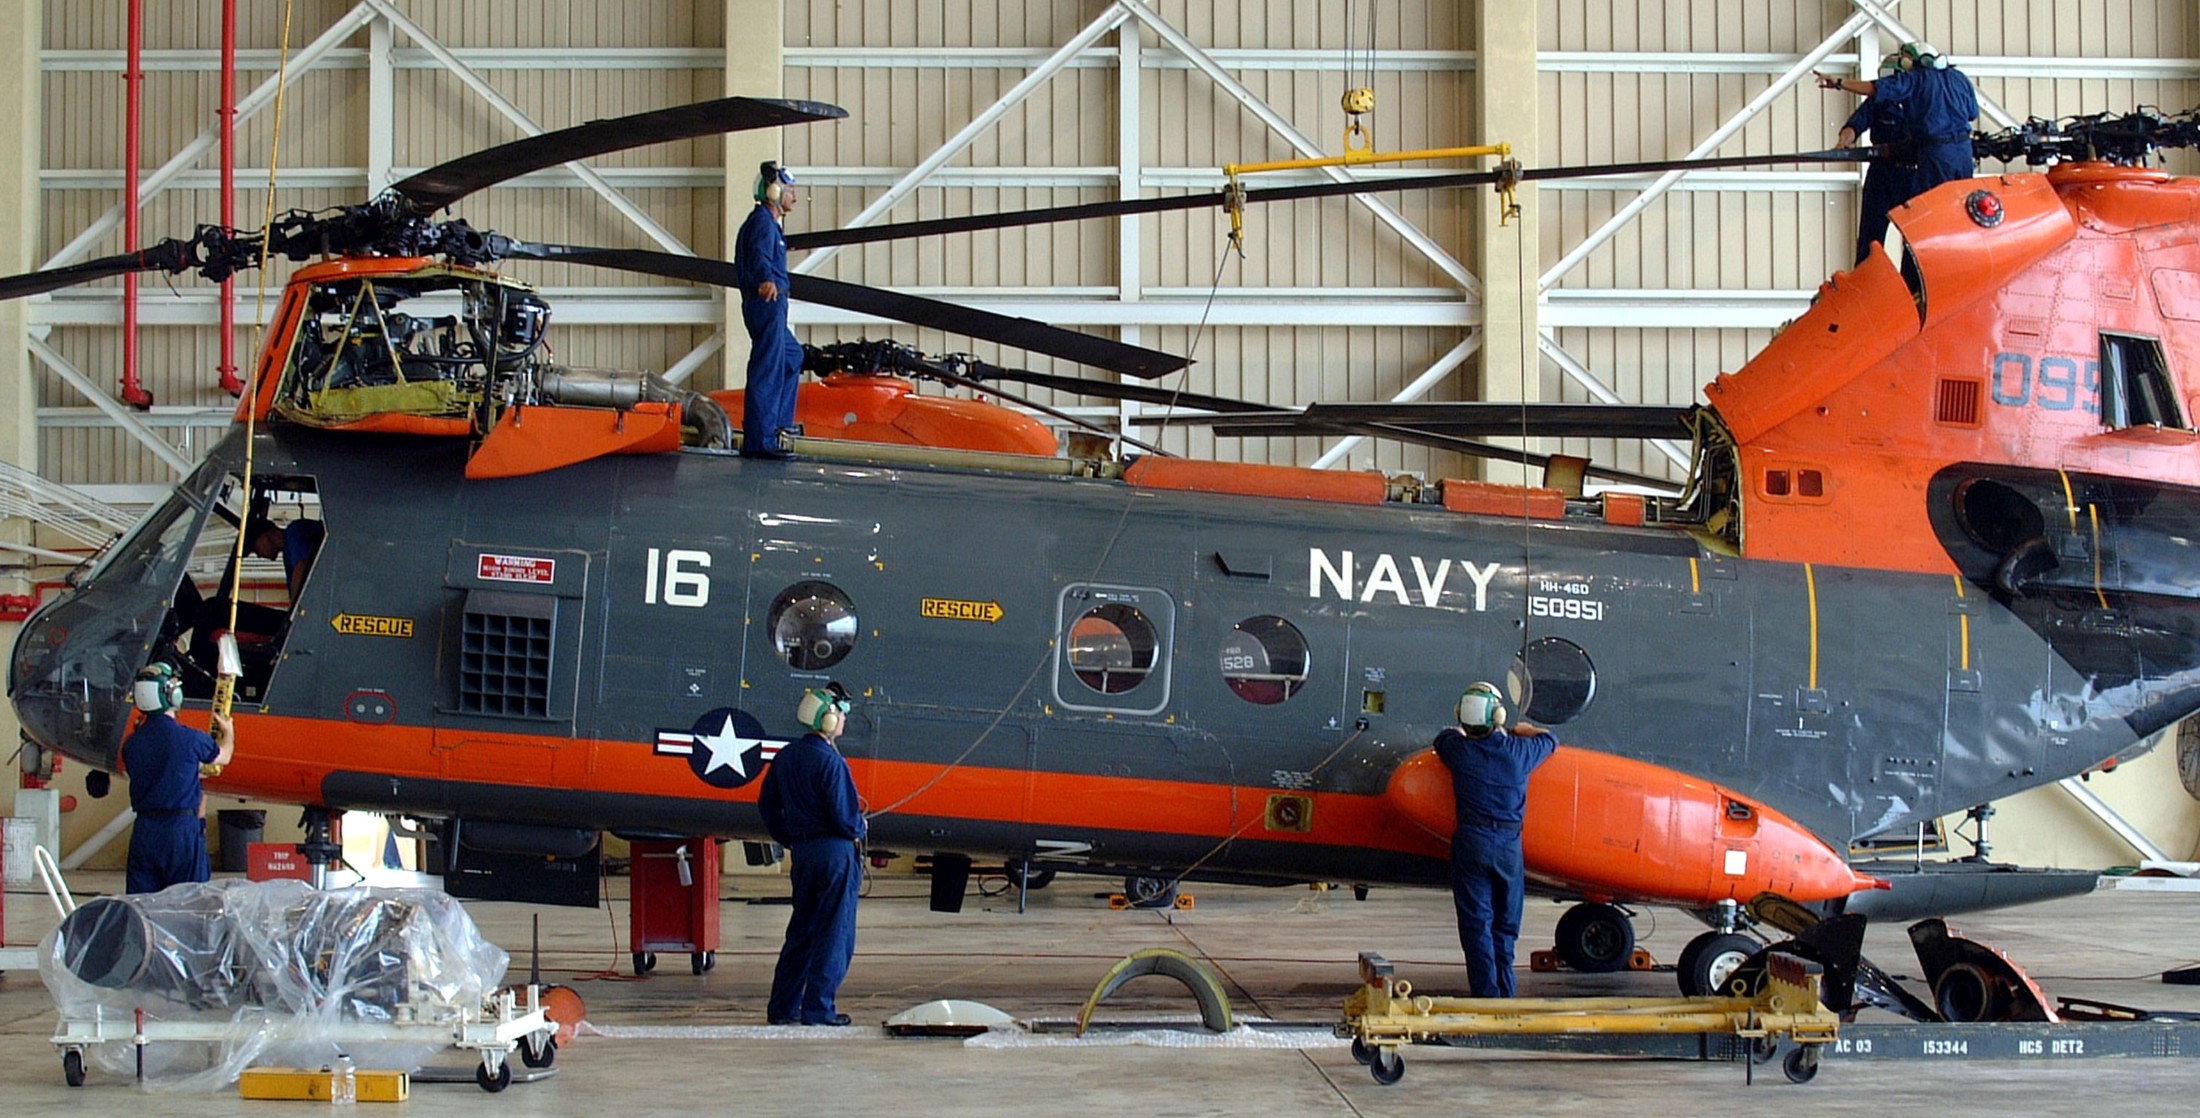 hc-5 providers helicopter combat support squadron navy hh-46d sea knight 33